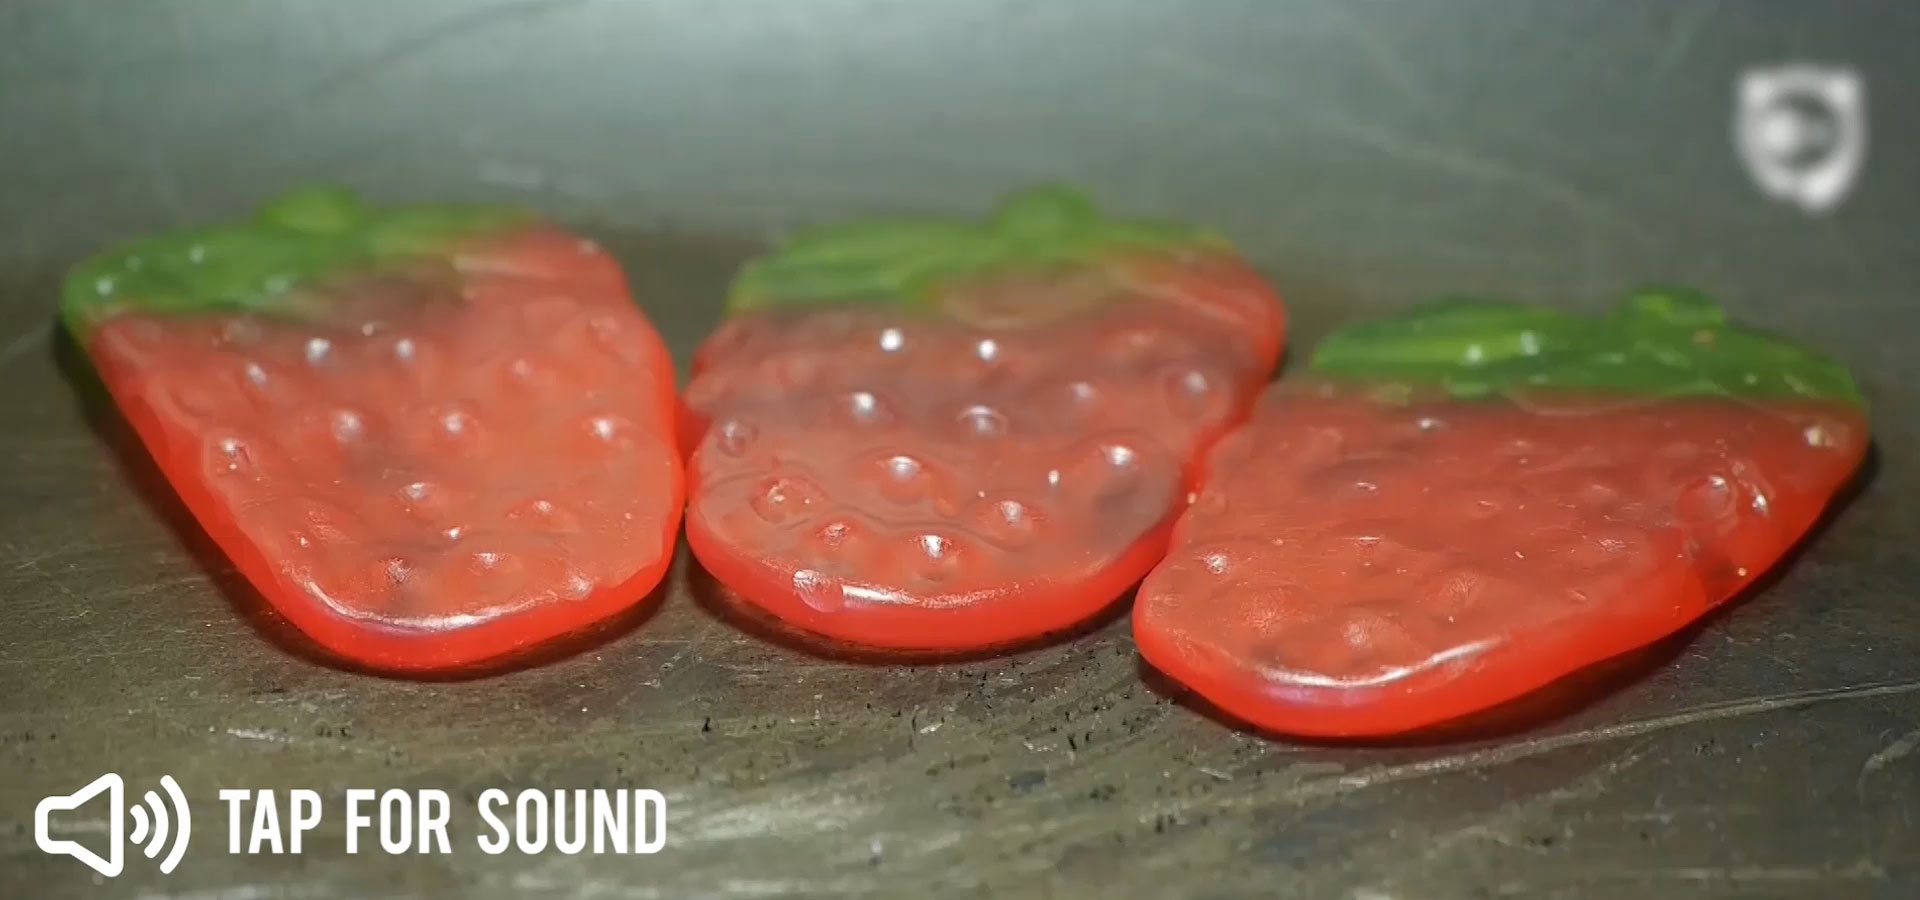 Melting Candies To Classical Music